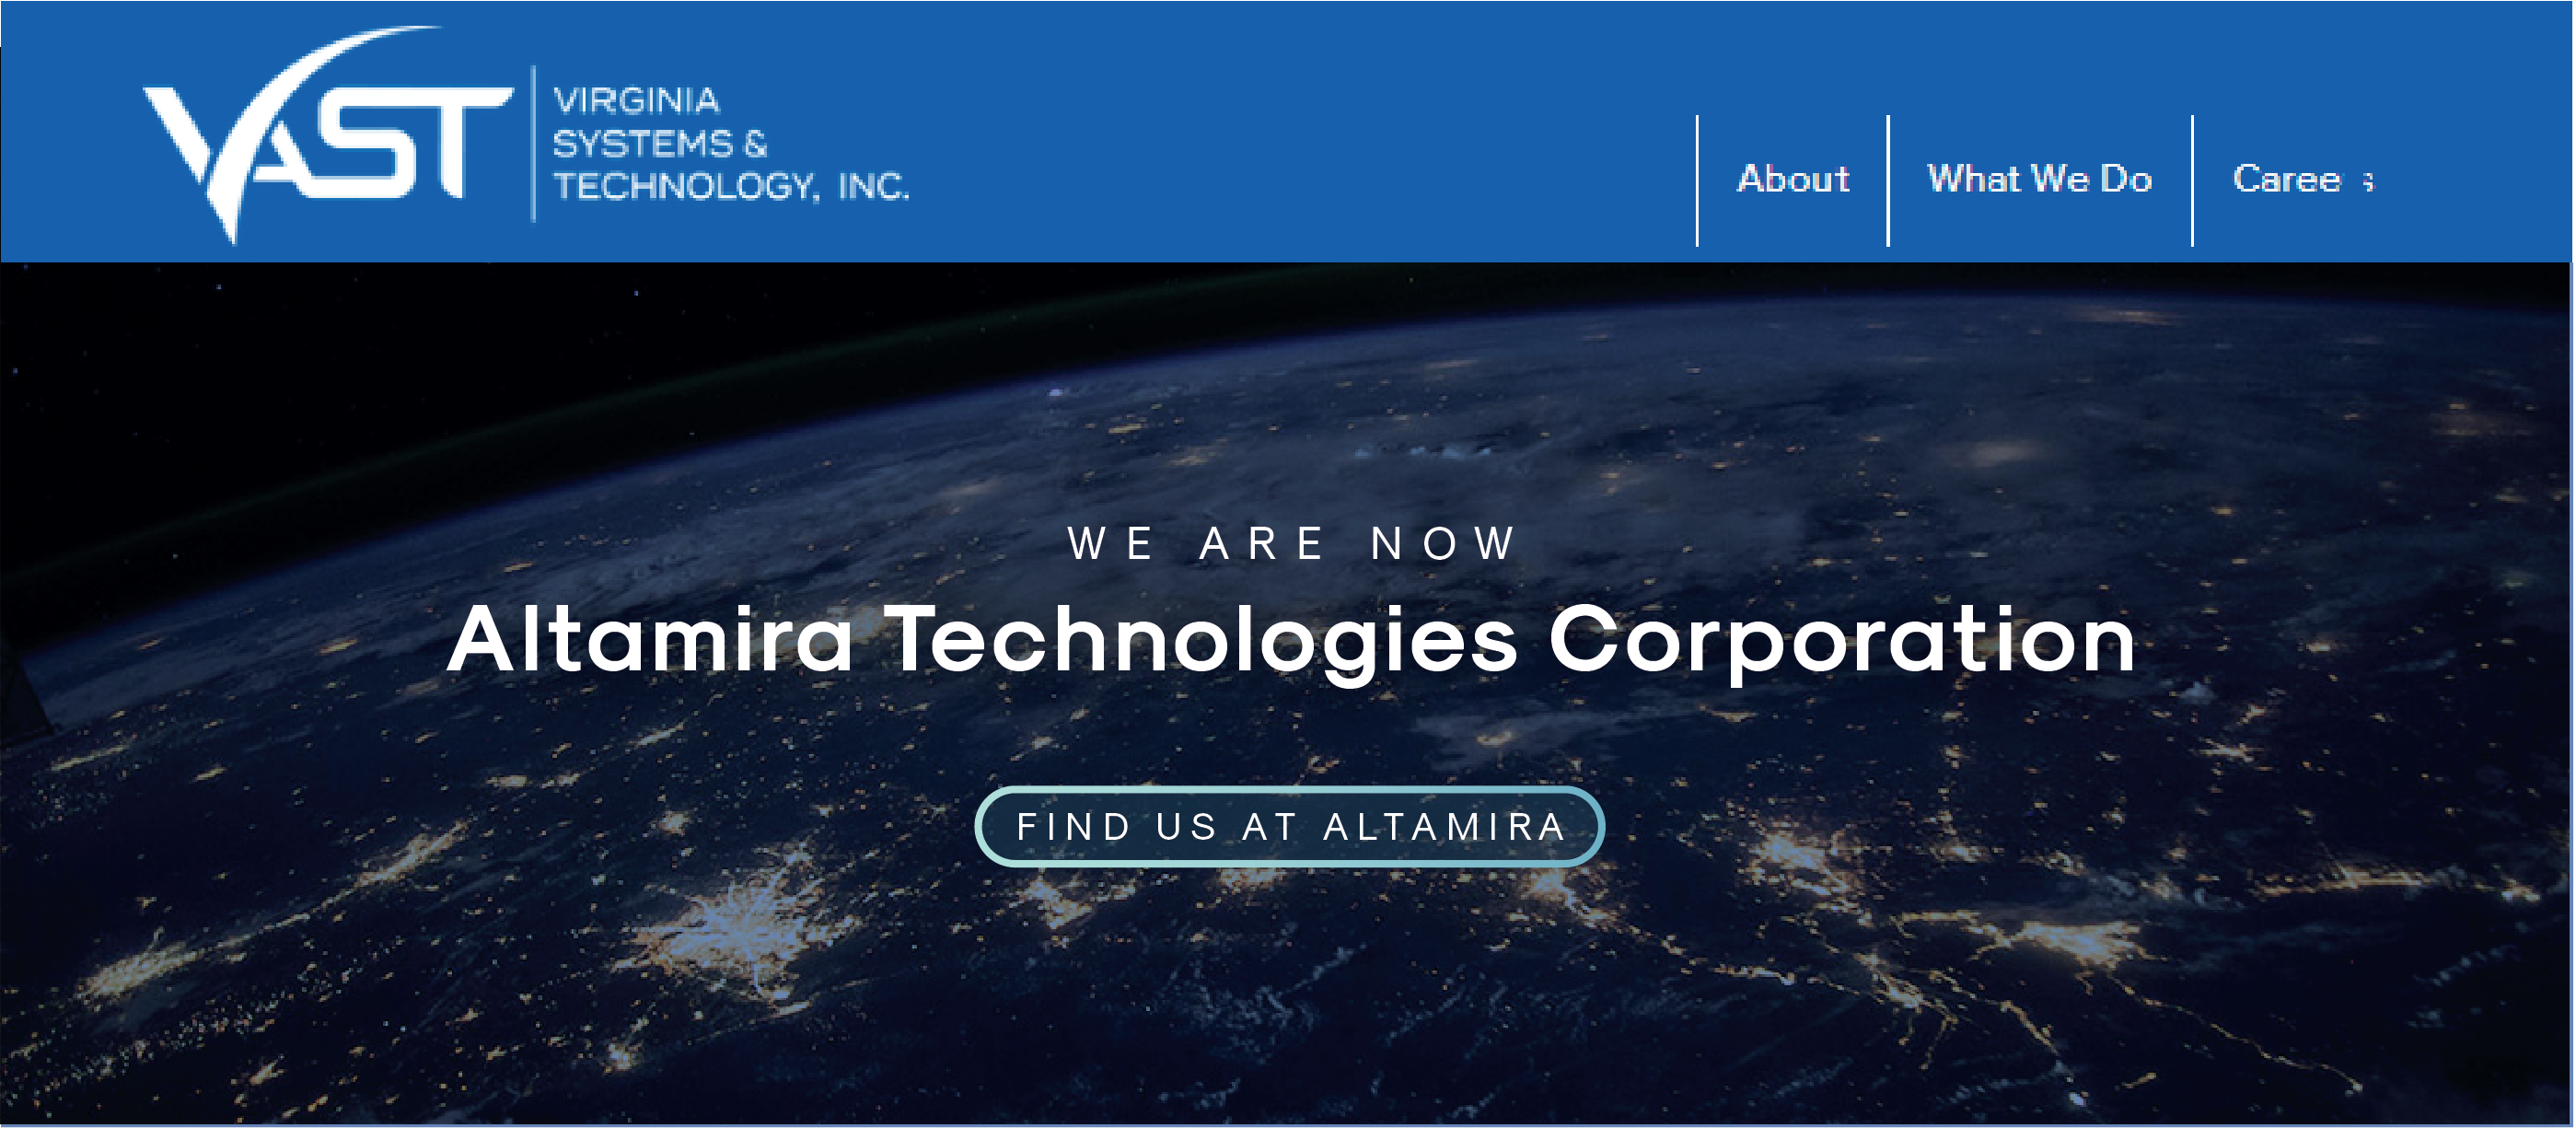 Altamira acquires Virginia Systems & Technology